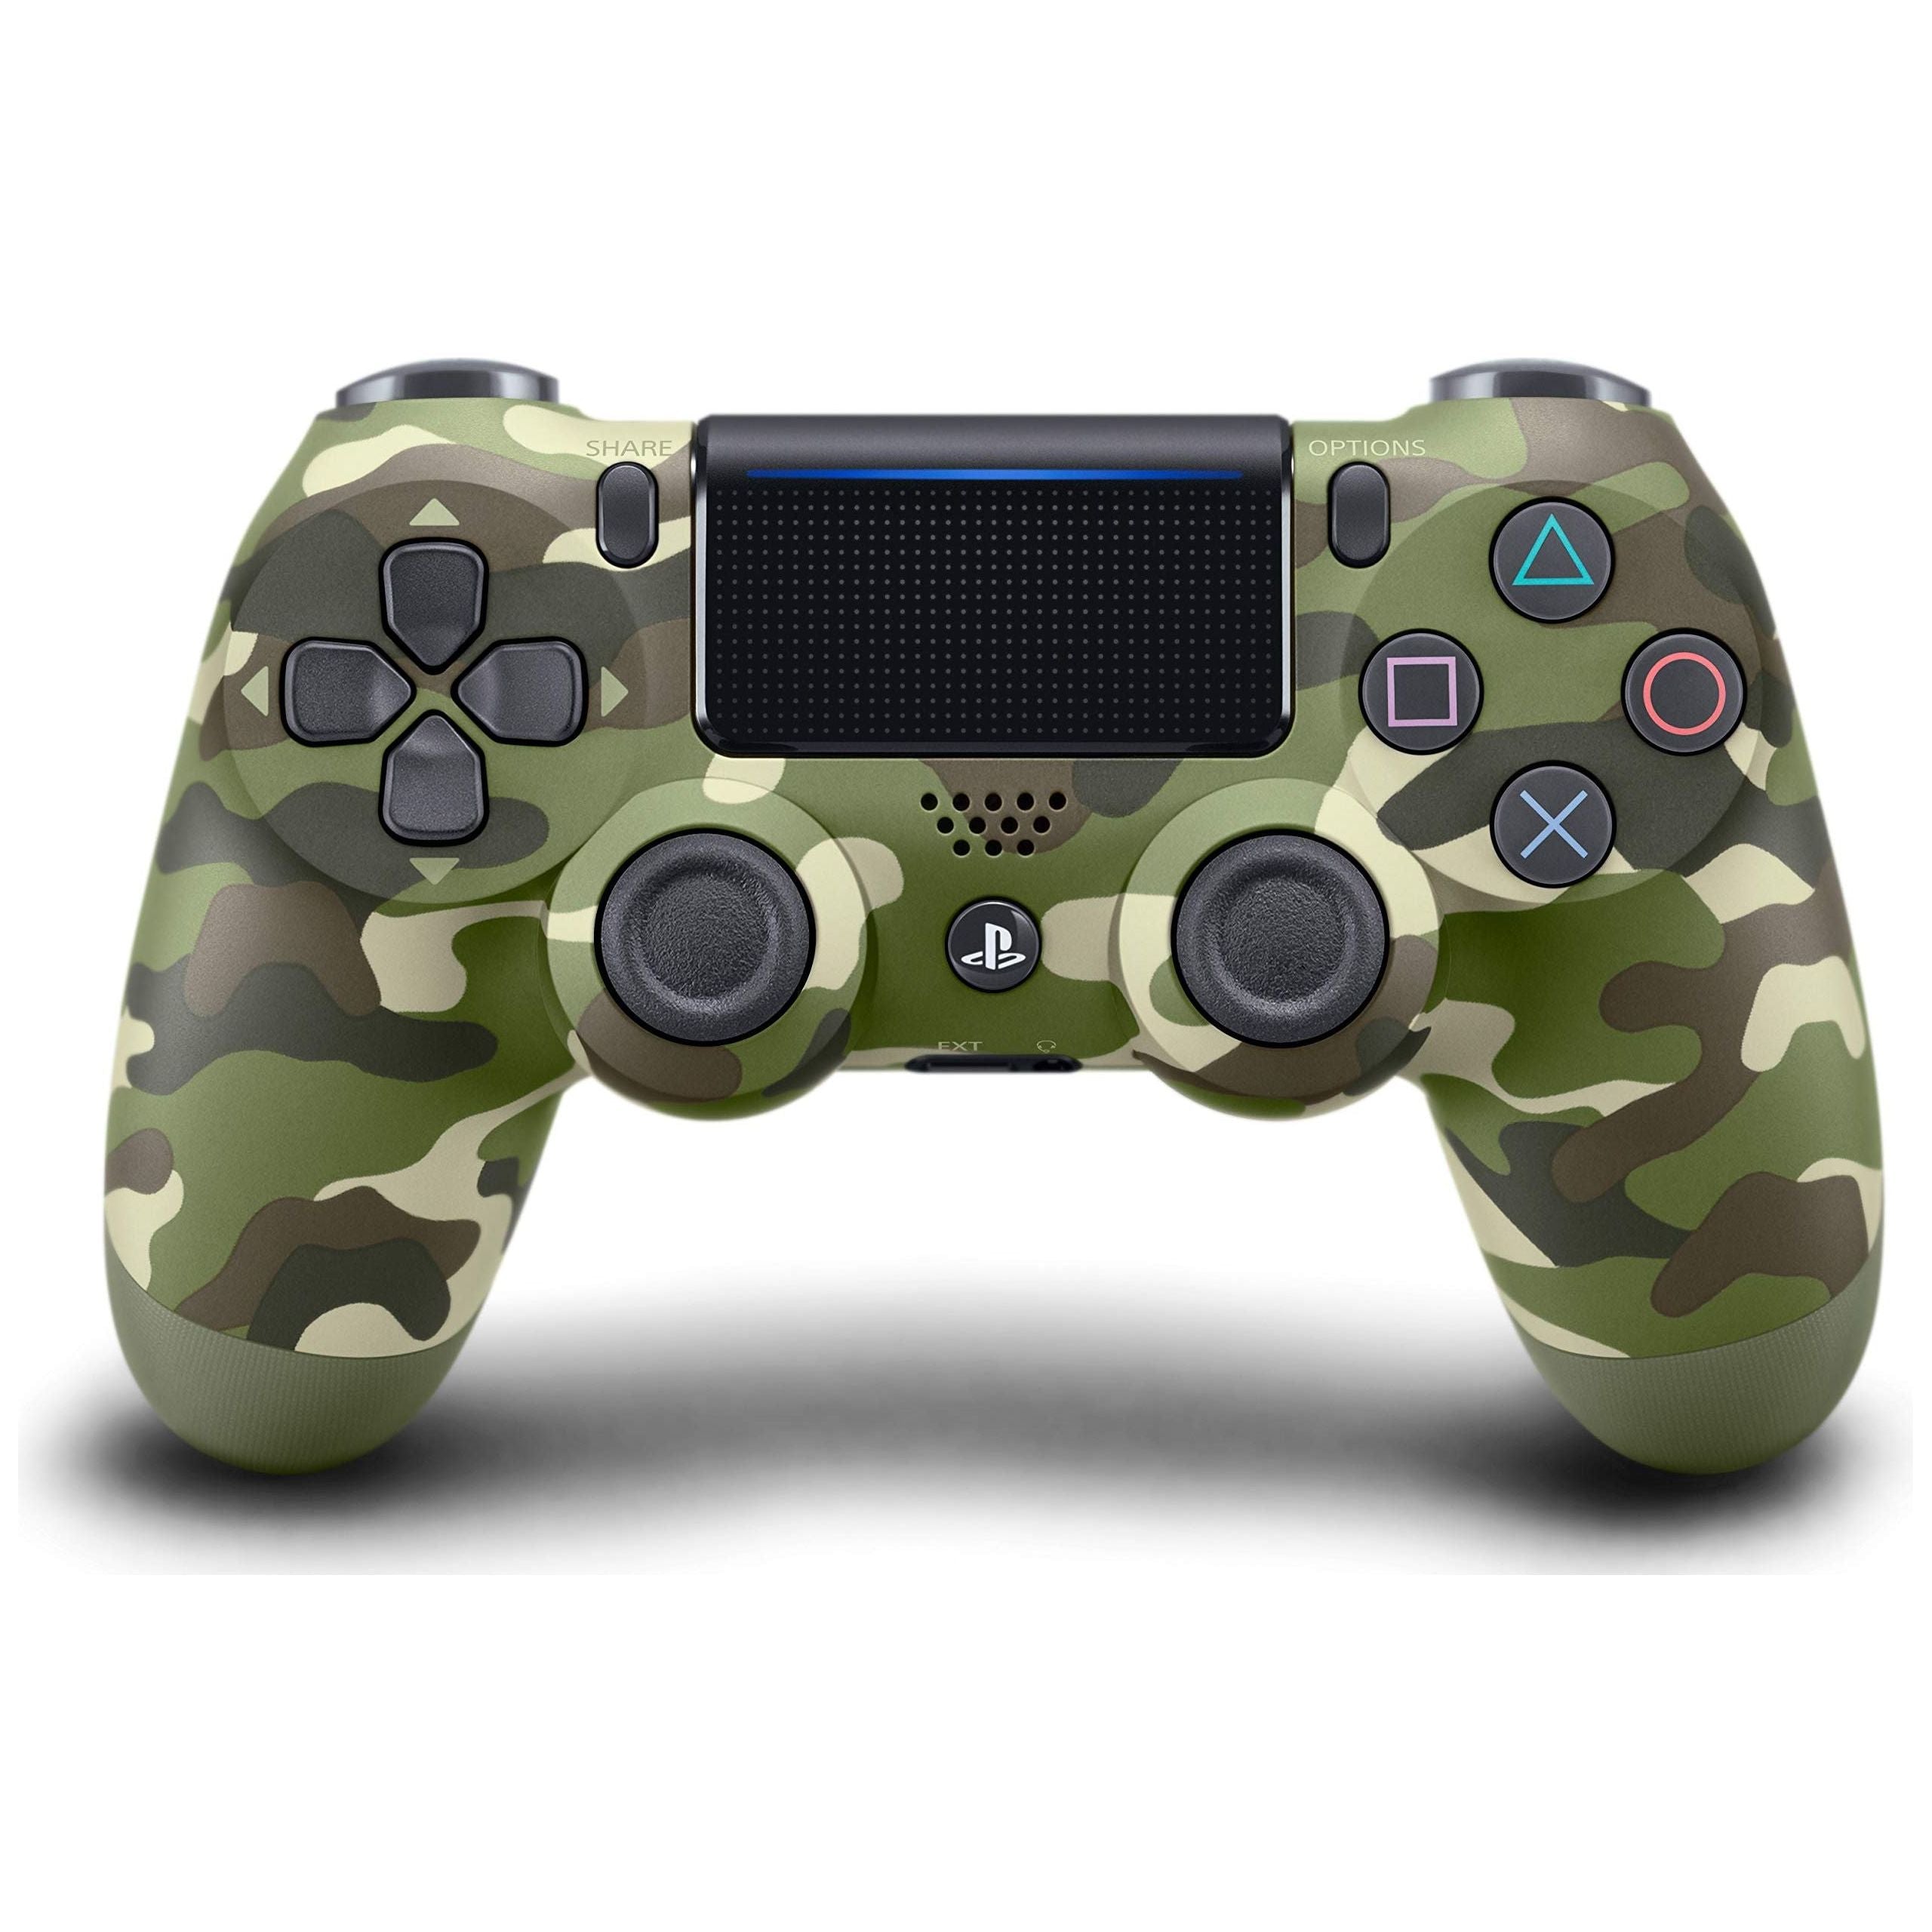 Sony Branded DualShock 4 PS4 Wireless Controller (Used / Camo)